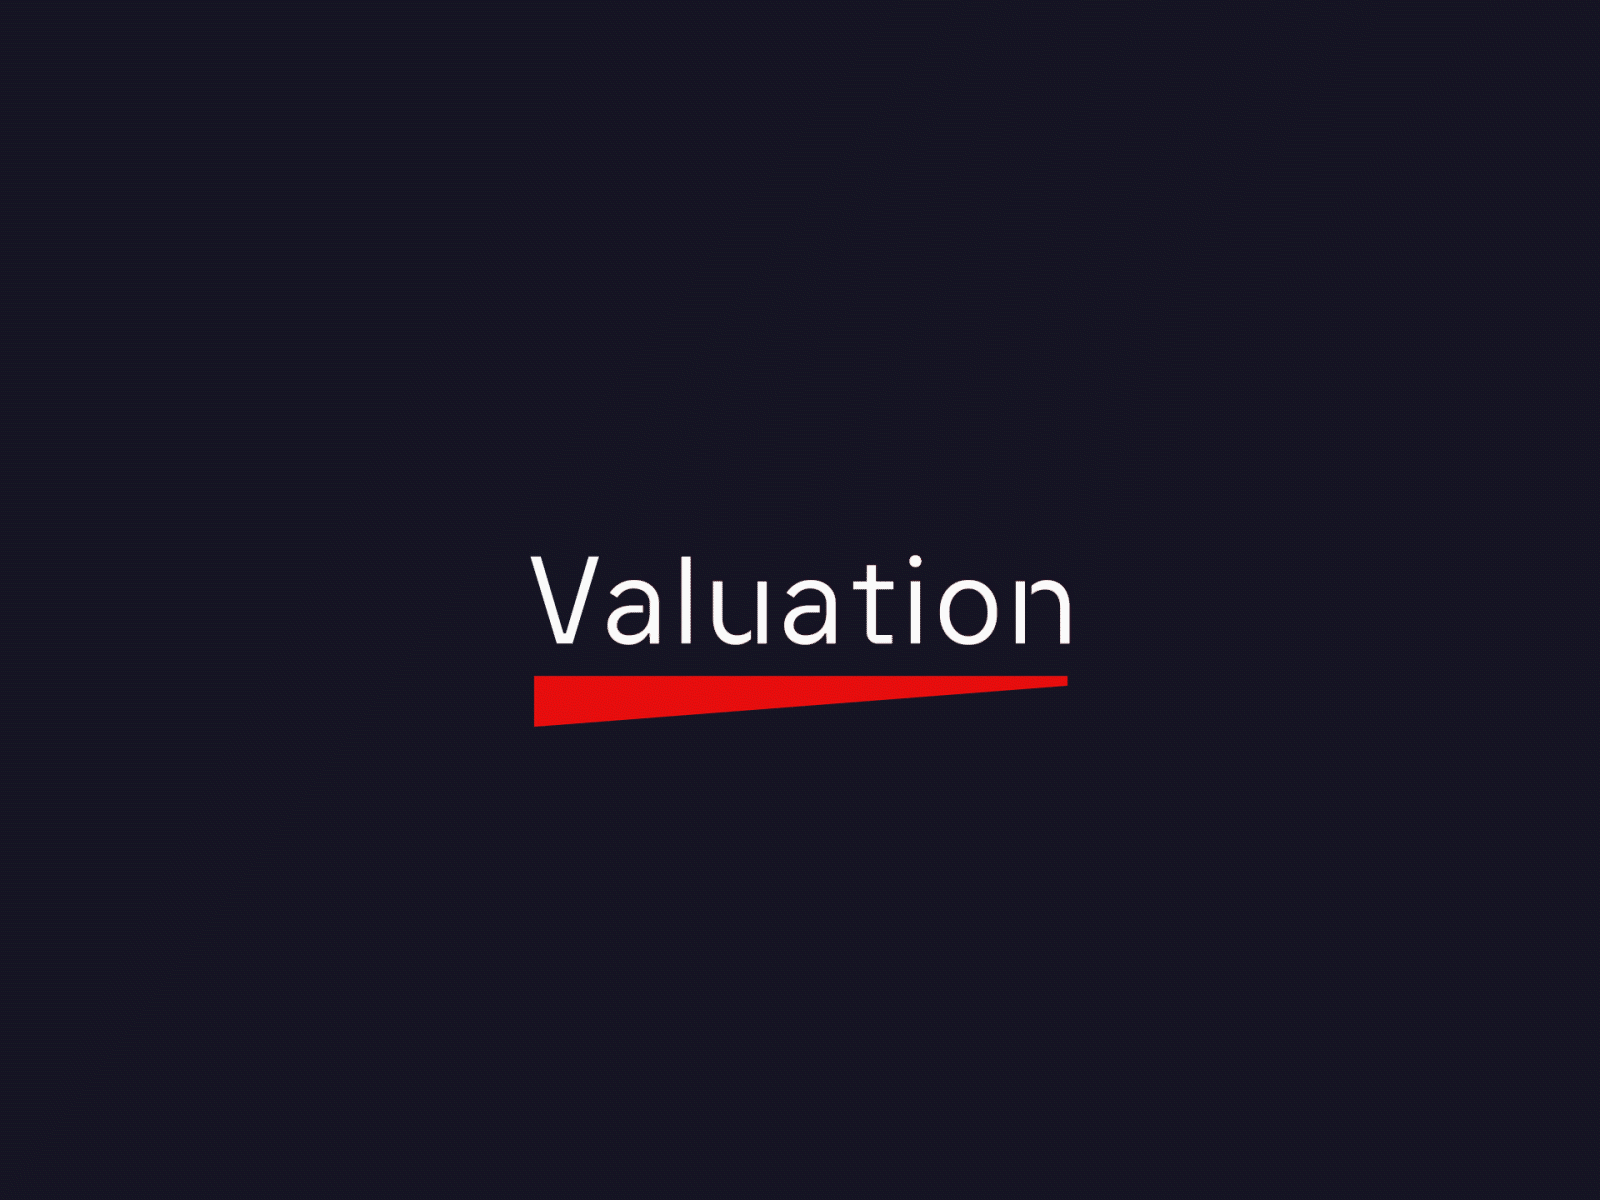 Valuation - Fintech Company animated gif animation app branding clean design financial graphic logo logo animation logo app logo design logotipo logotype minimal modern motion red technology type